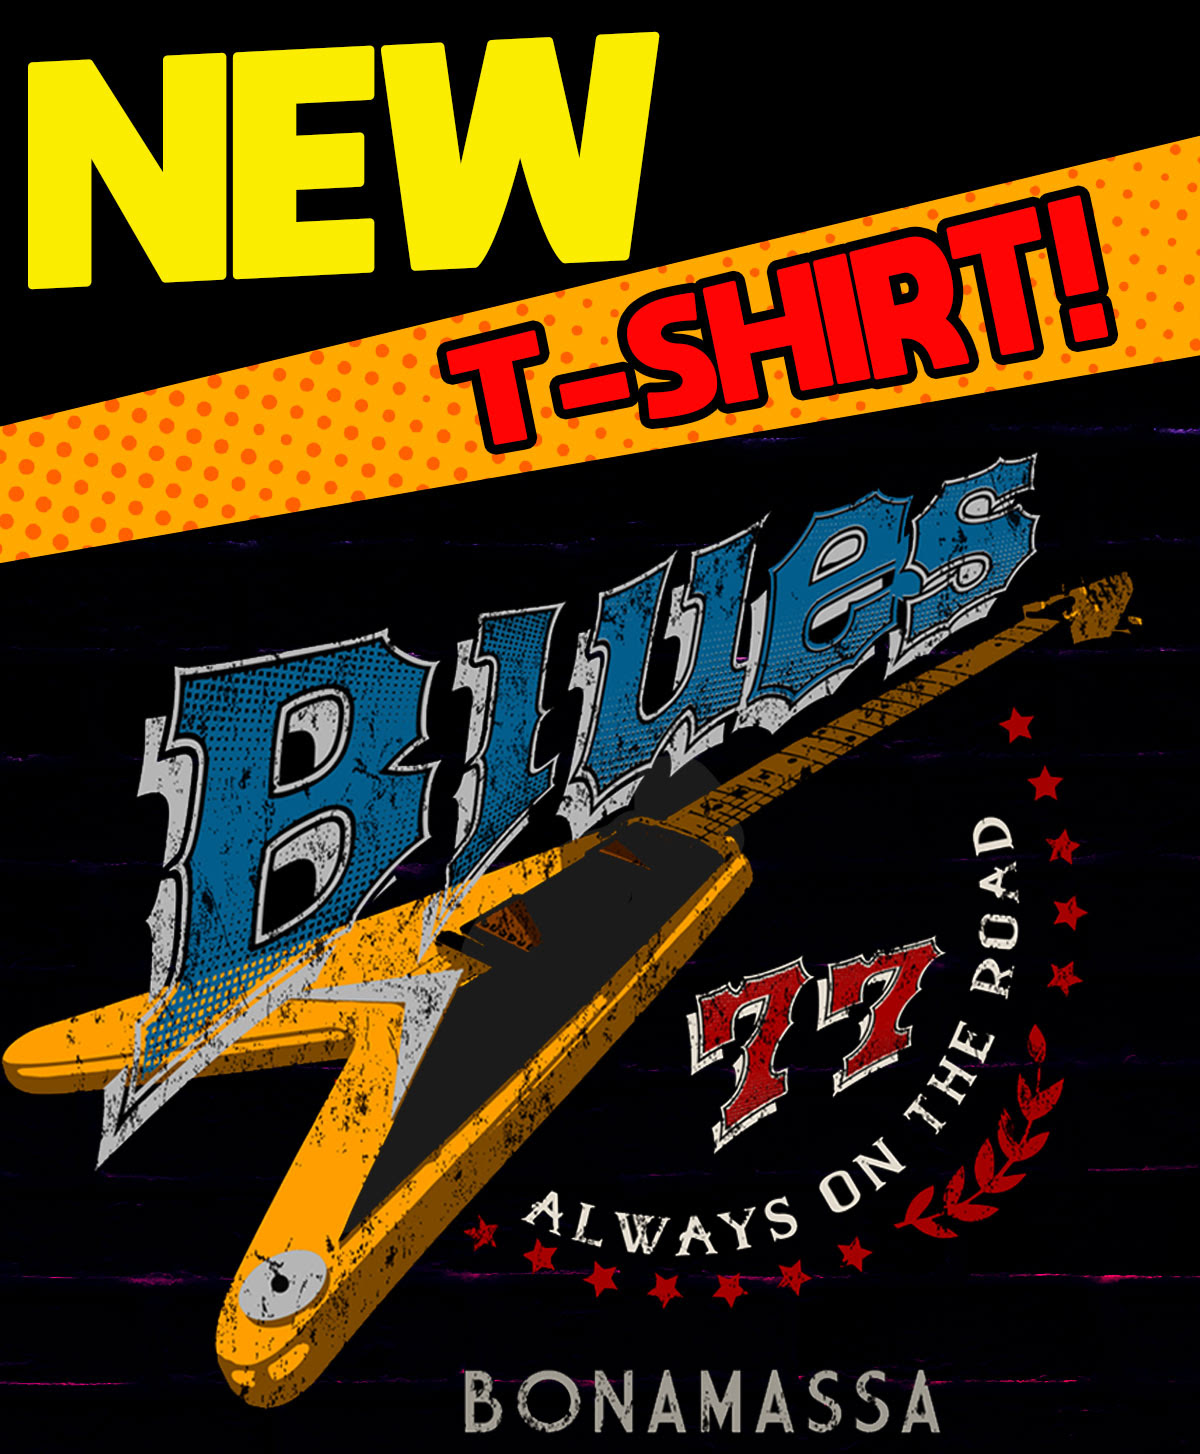 Our featured apparel of the week, sporting a hot JB-inspired design!